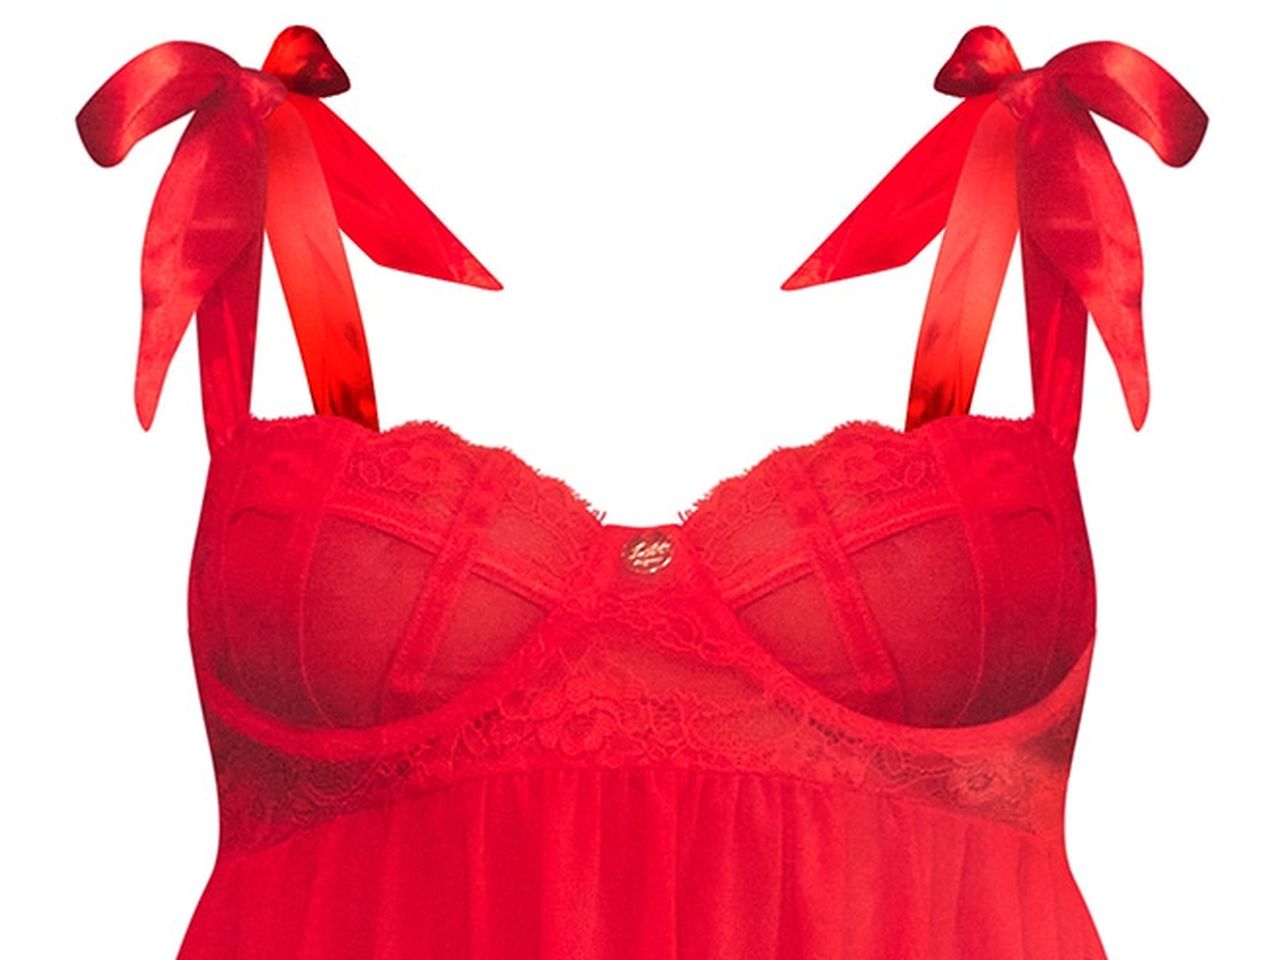 Boohoo have released a sexy Valentine's lingerie collection and we're  obsessed - Mirror Online